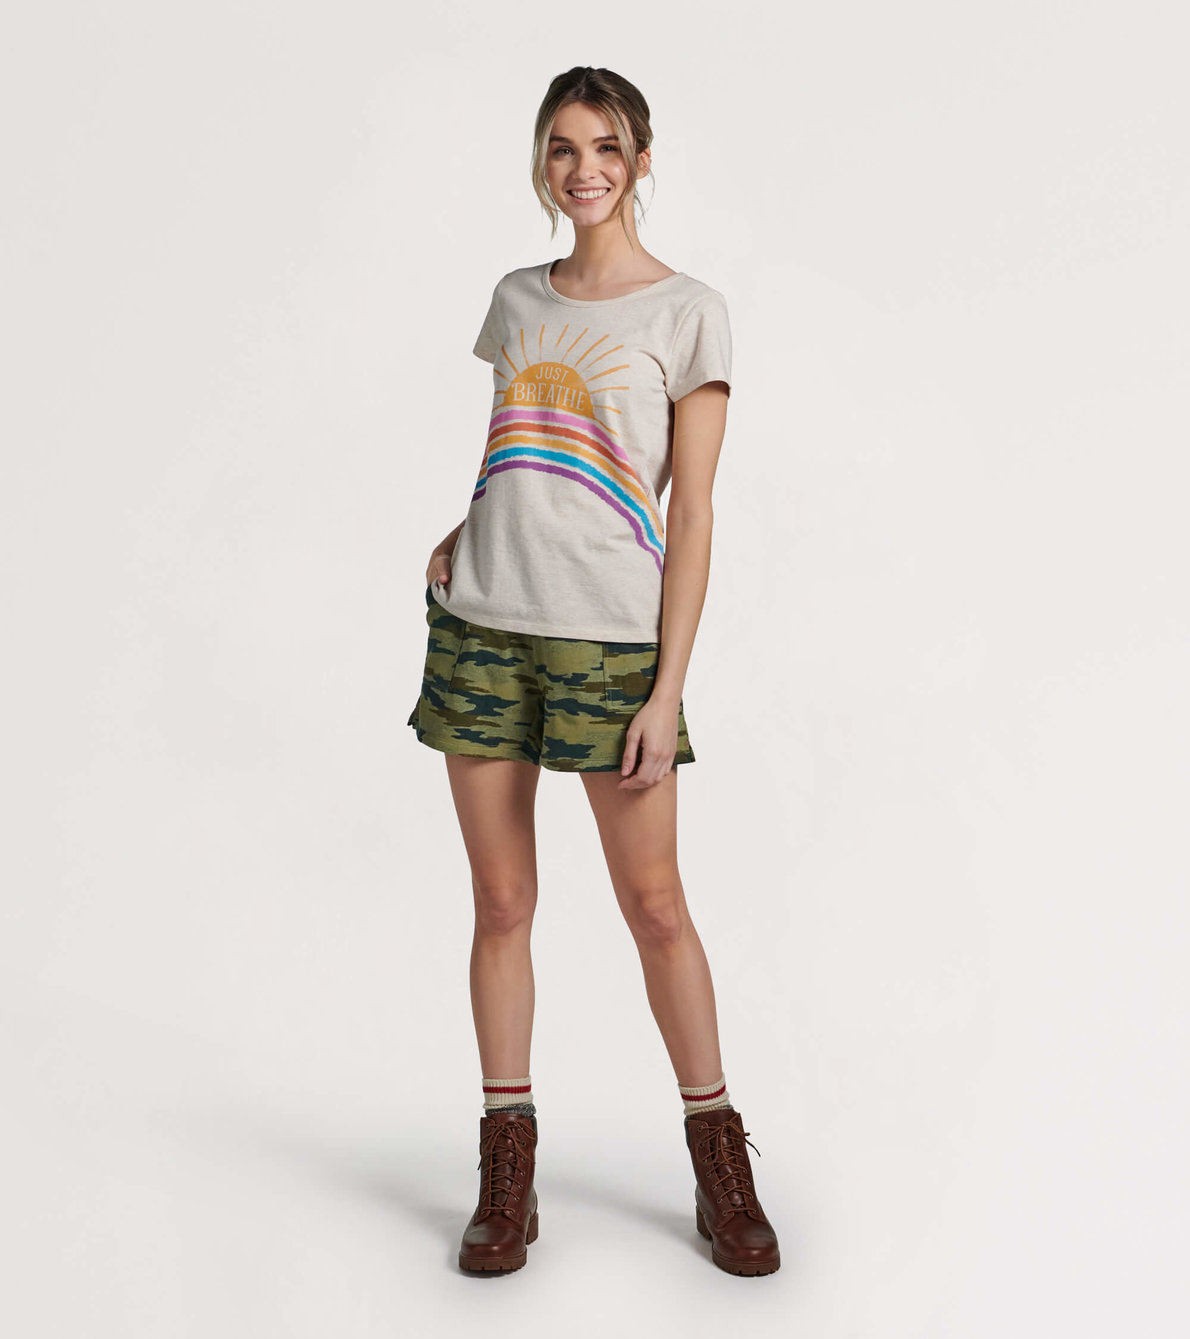 View larger image of Woodland Camo Women's Heritage Separates with Shorts